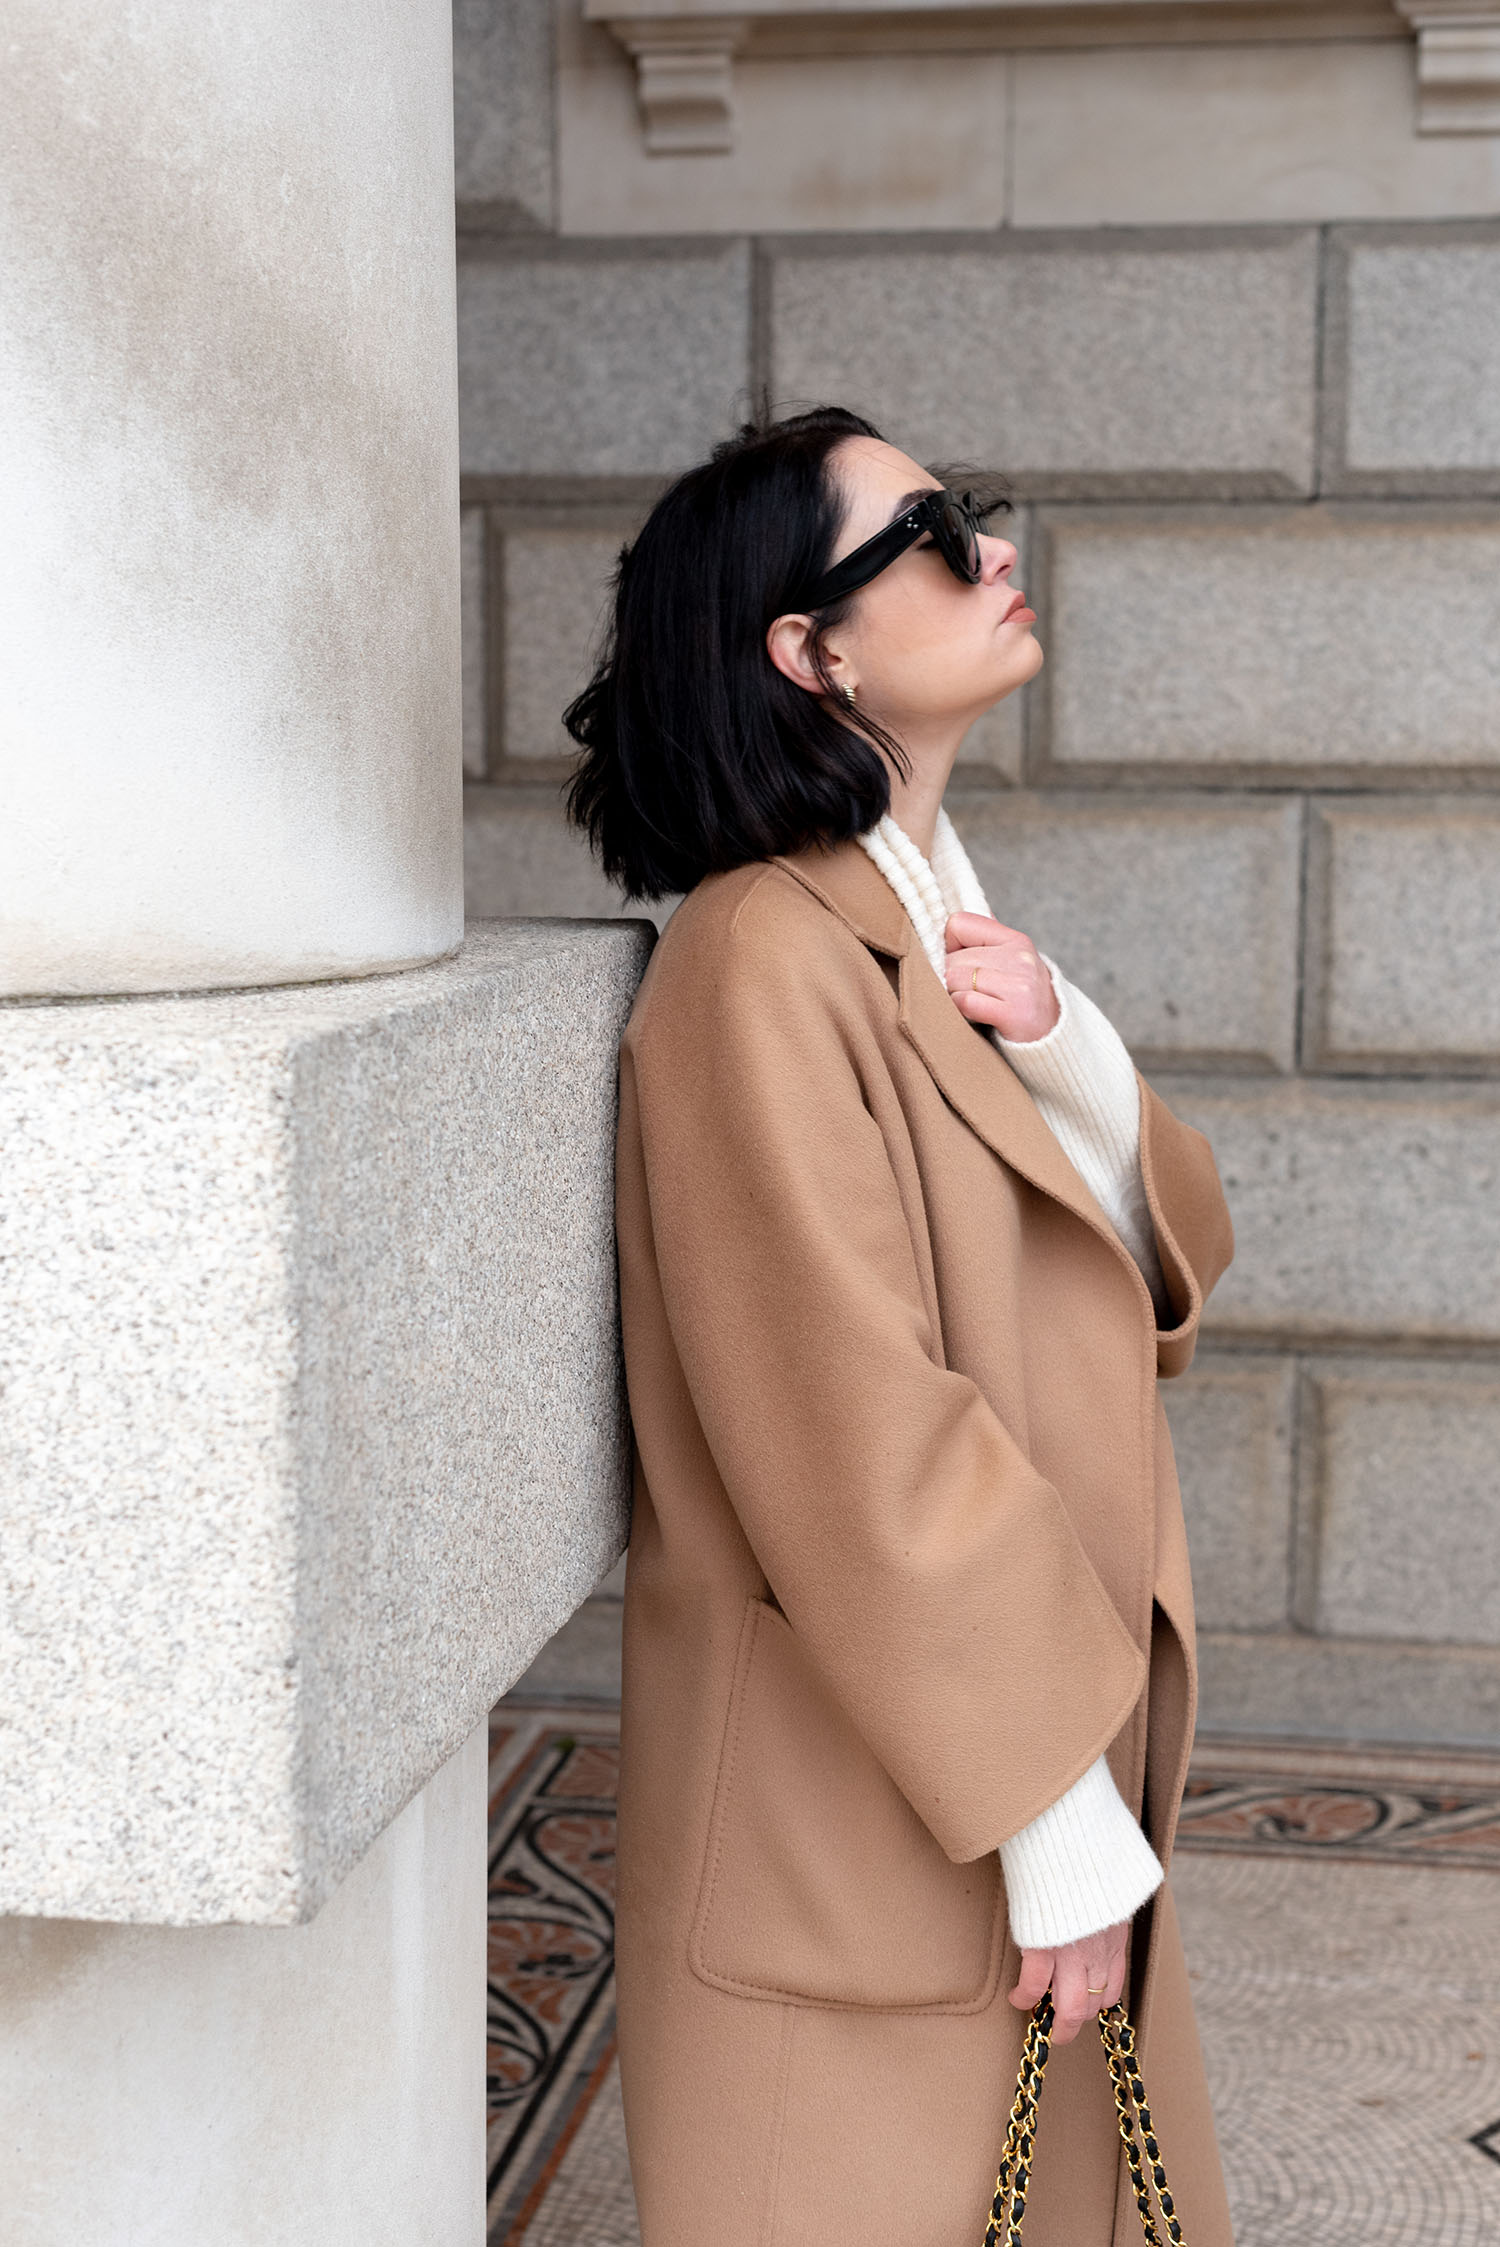 Coco & Vera - Celine Audrey sunglasses, Mejuri croissant dome earrings, The Curated camel coat